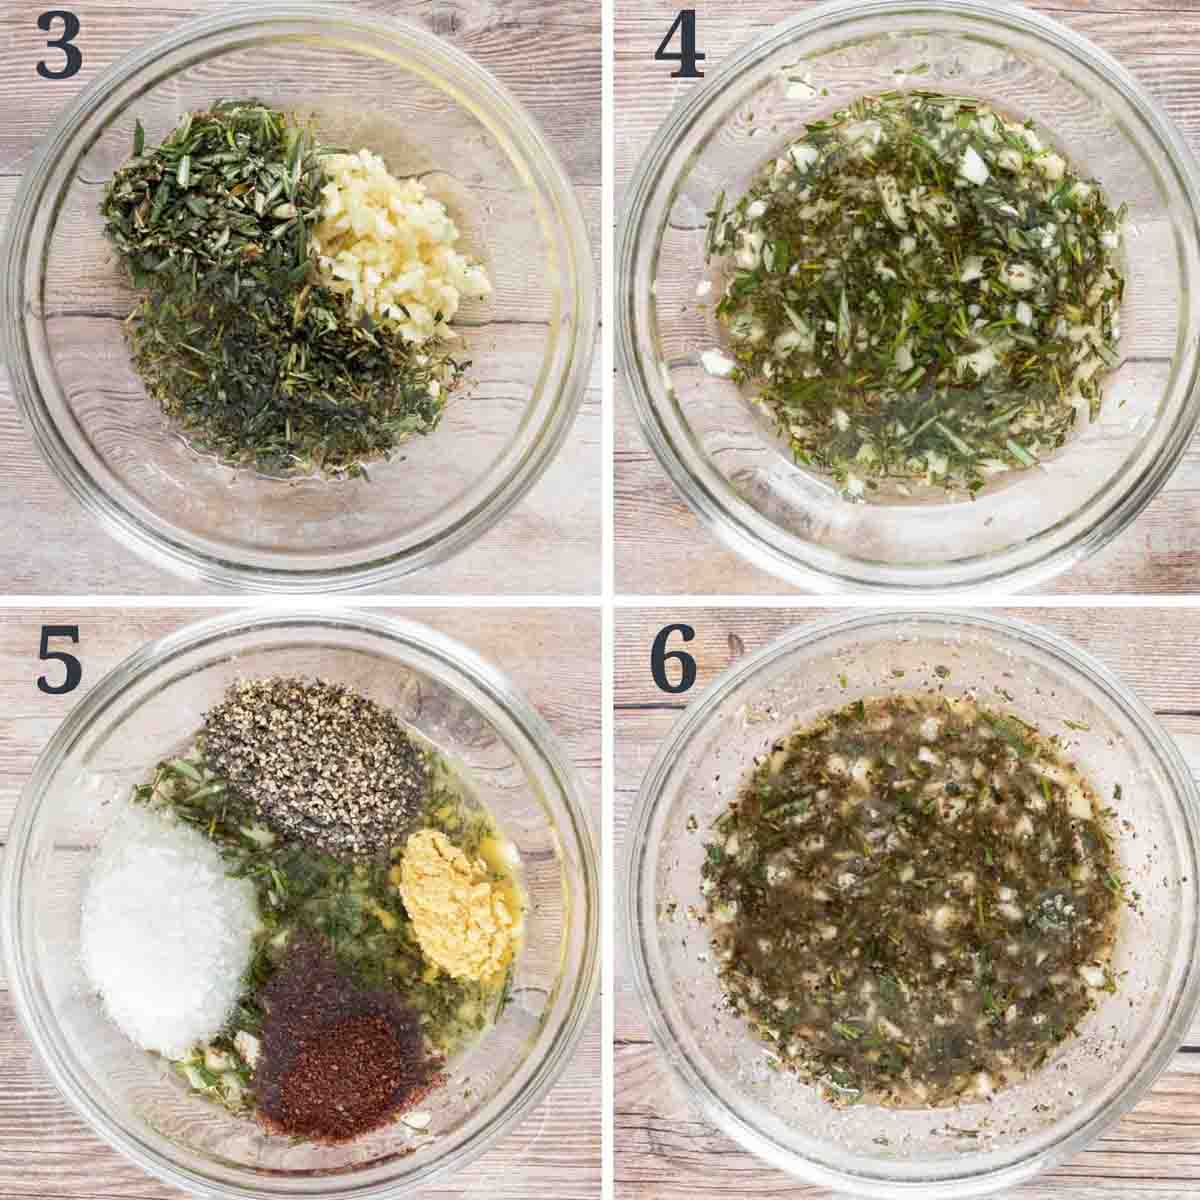 Collage showing how to prepare seasonings for recipe.